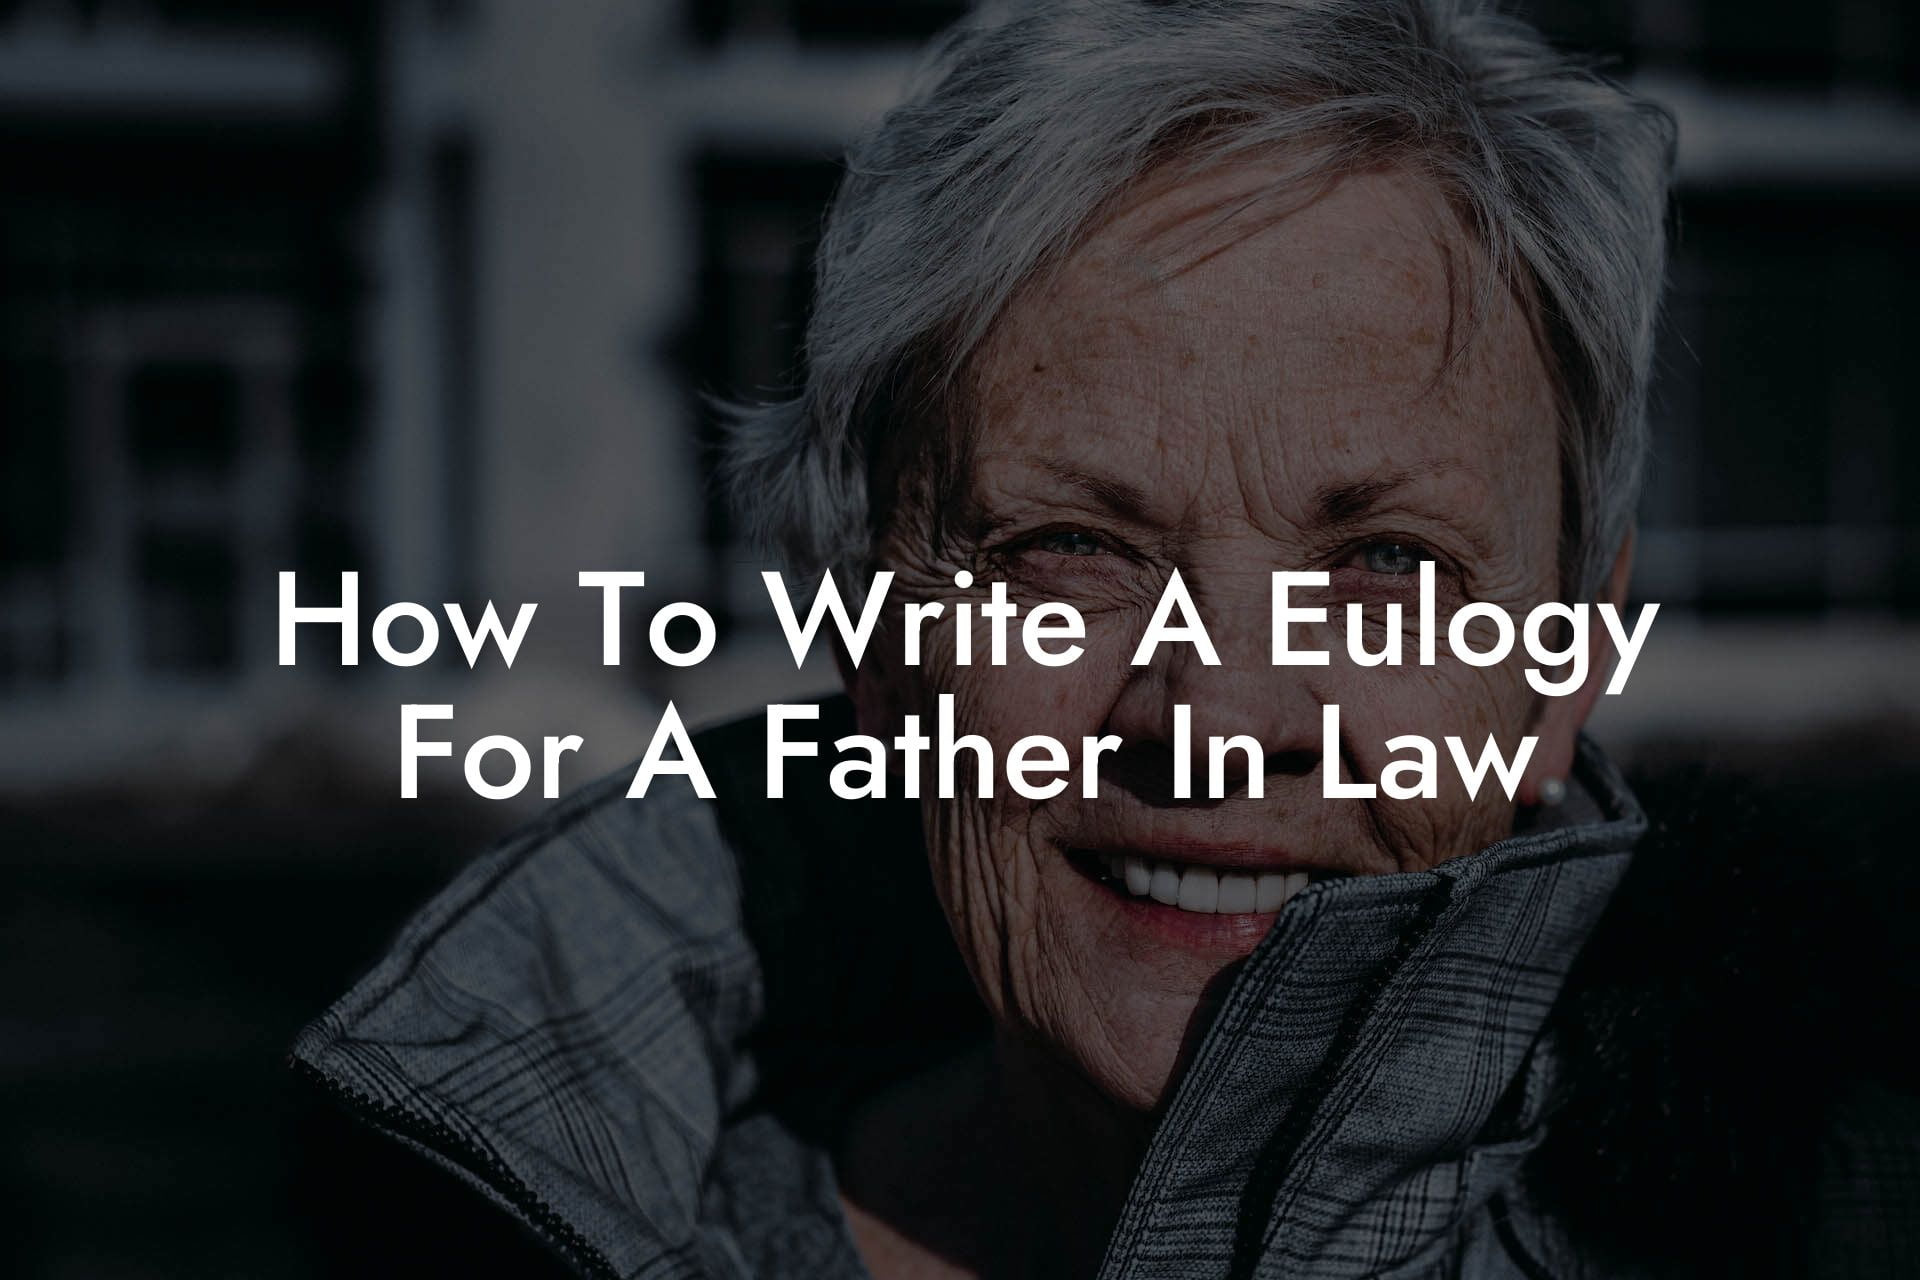 How To Write A Eulogy For A Father In Law